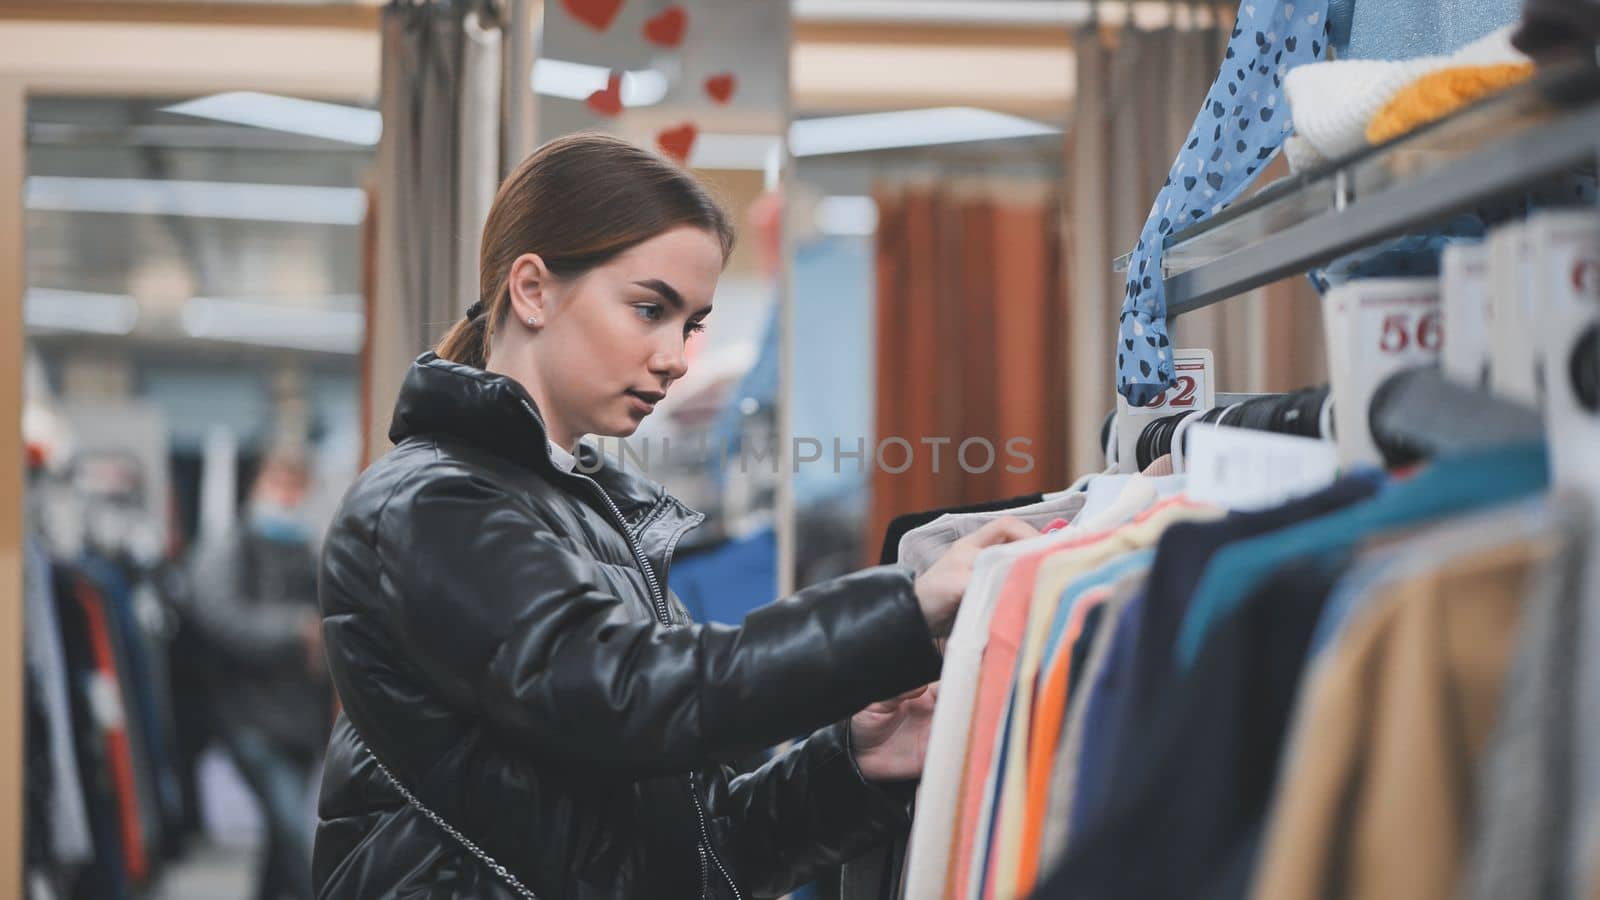 A young girl choosing and looking at clothes in the store